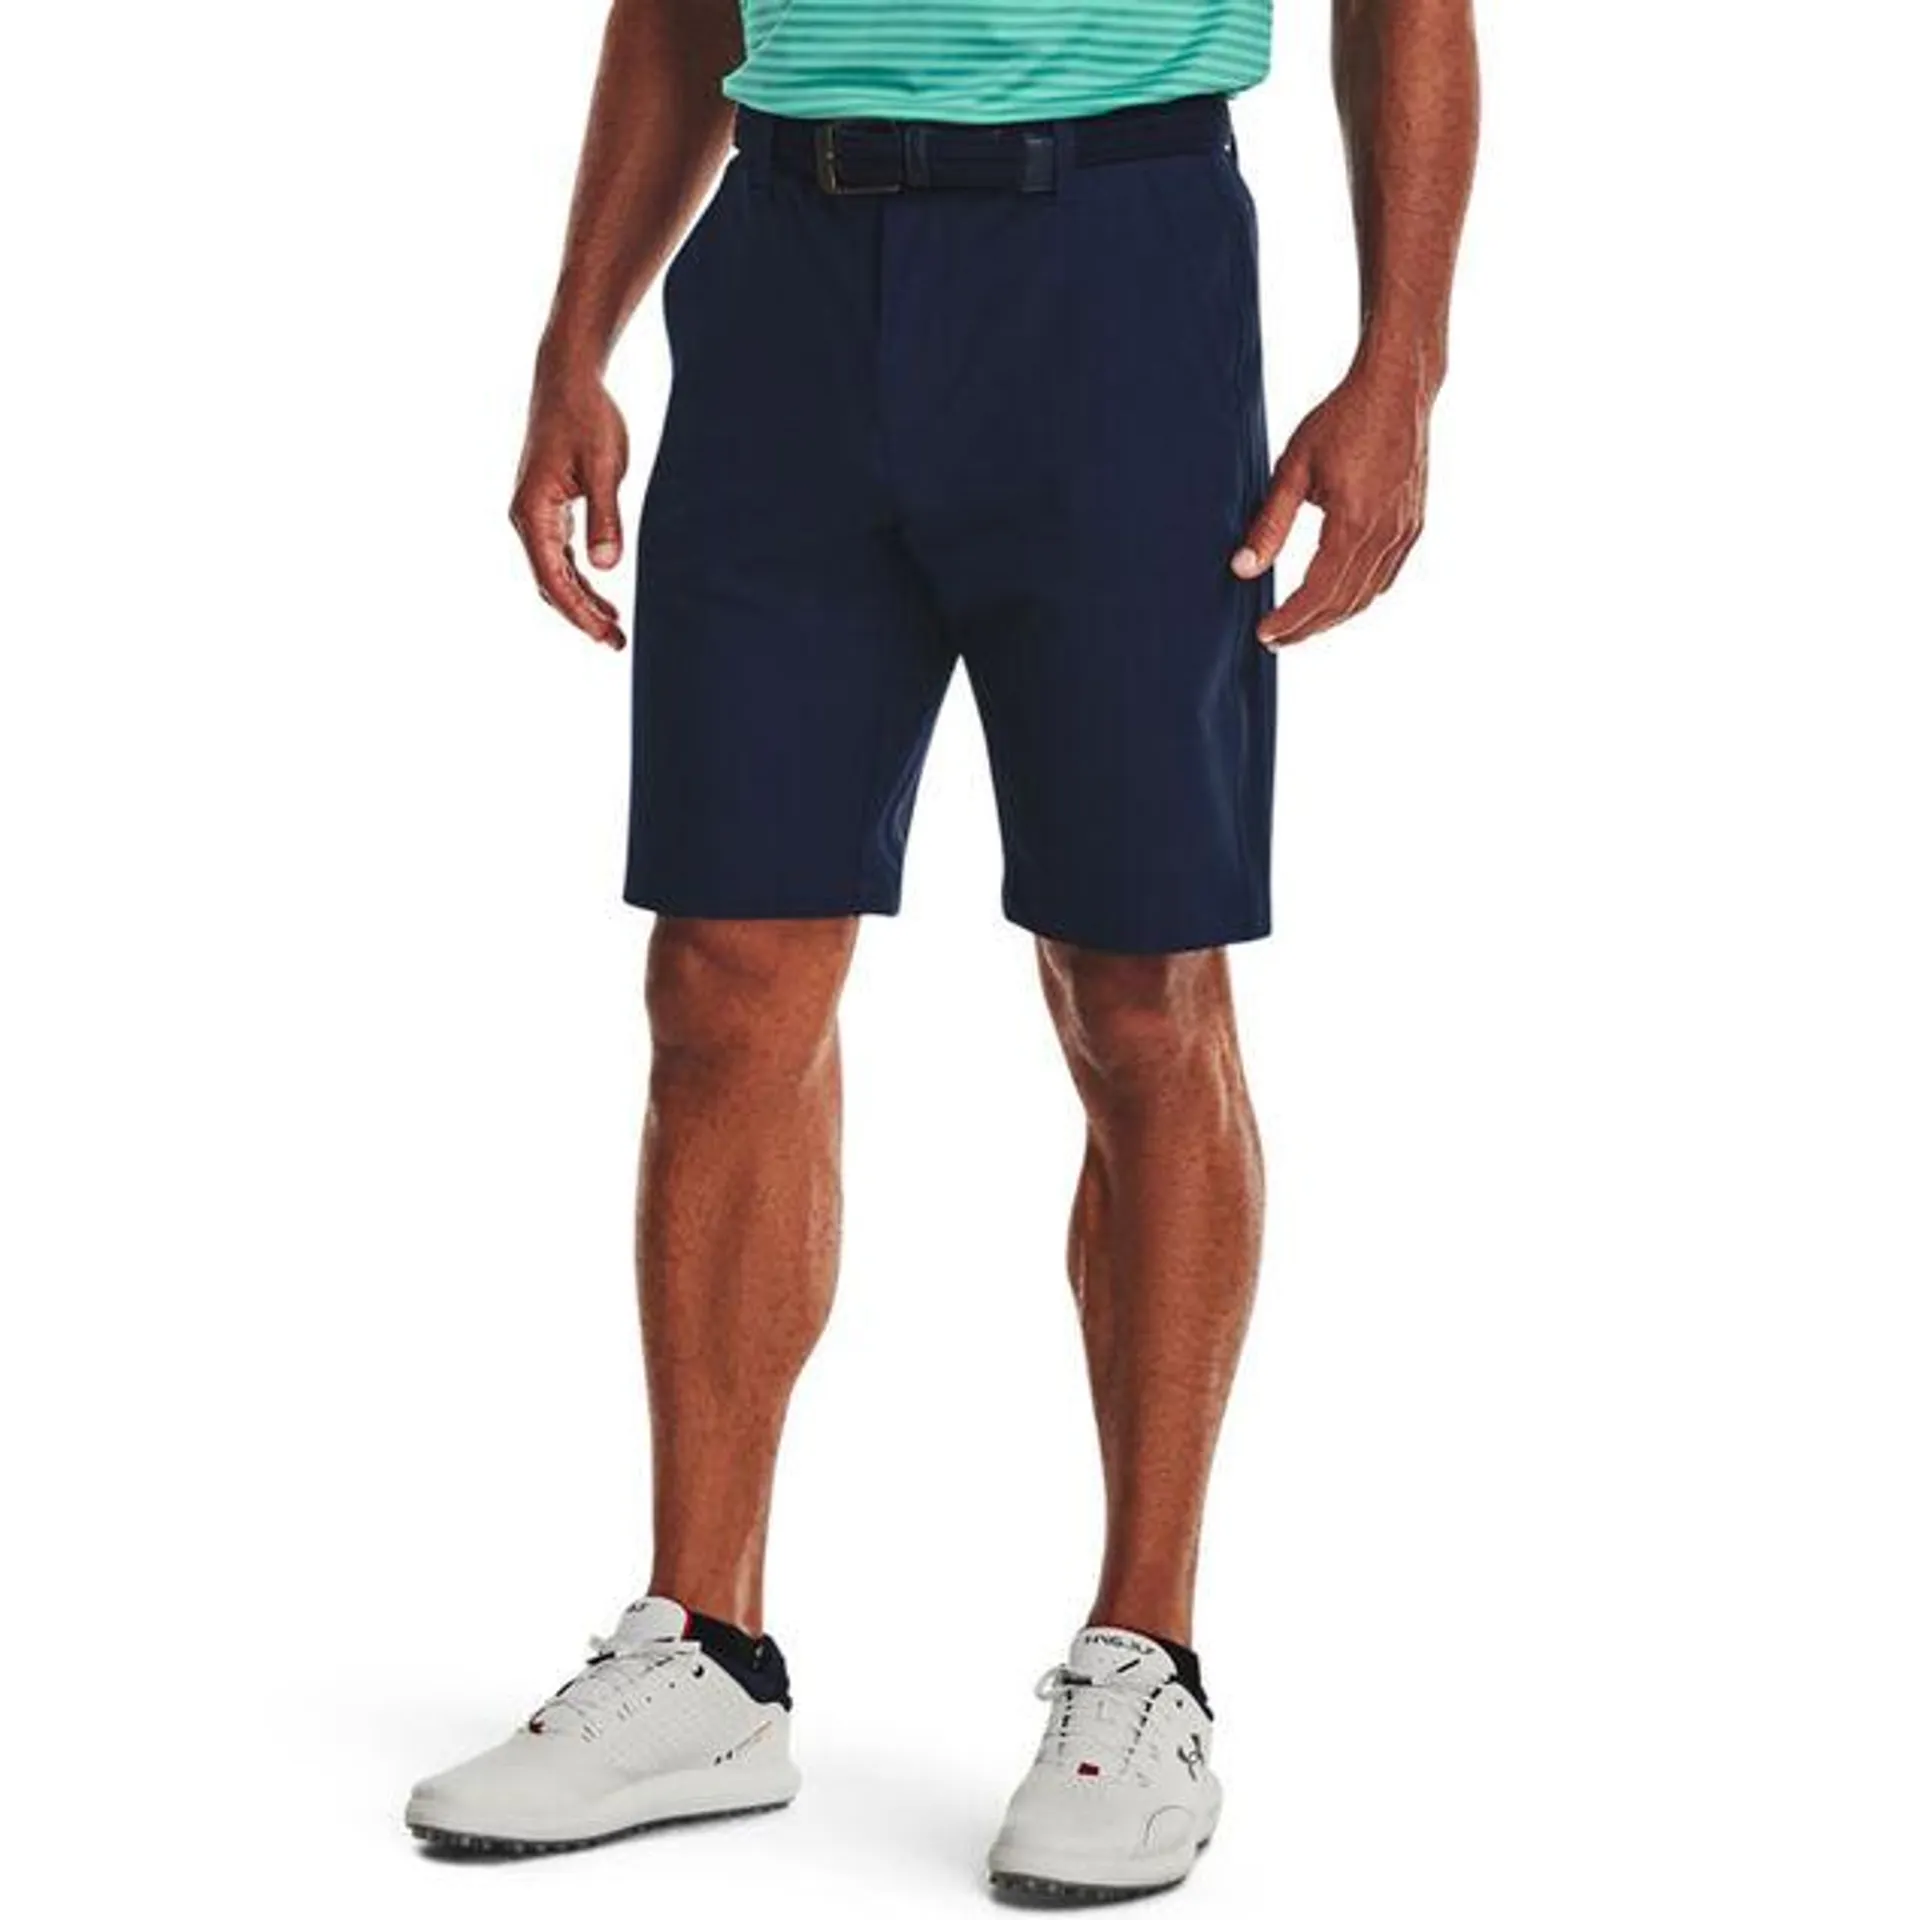 Under Armour Men's Drive Tapered Stretch Golf Shorts